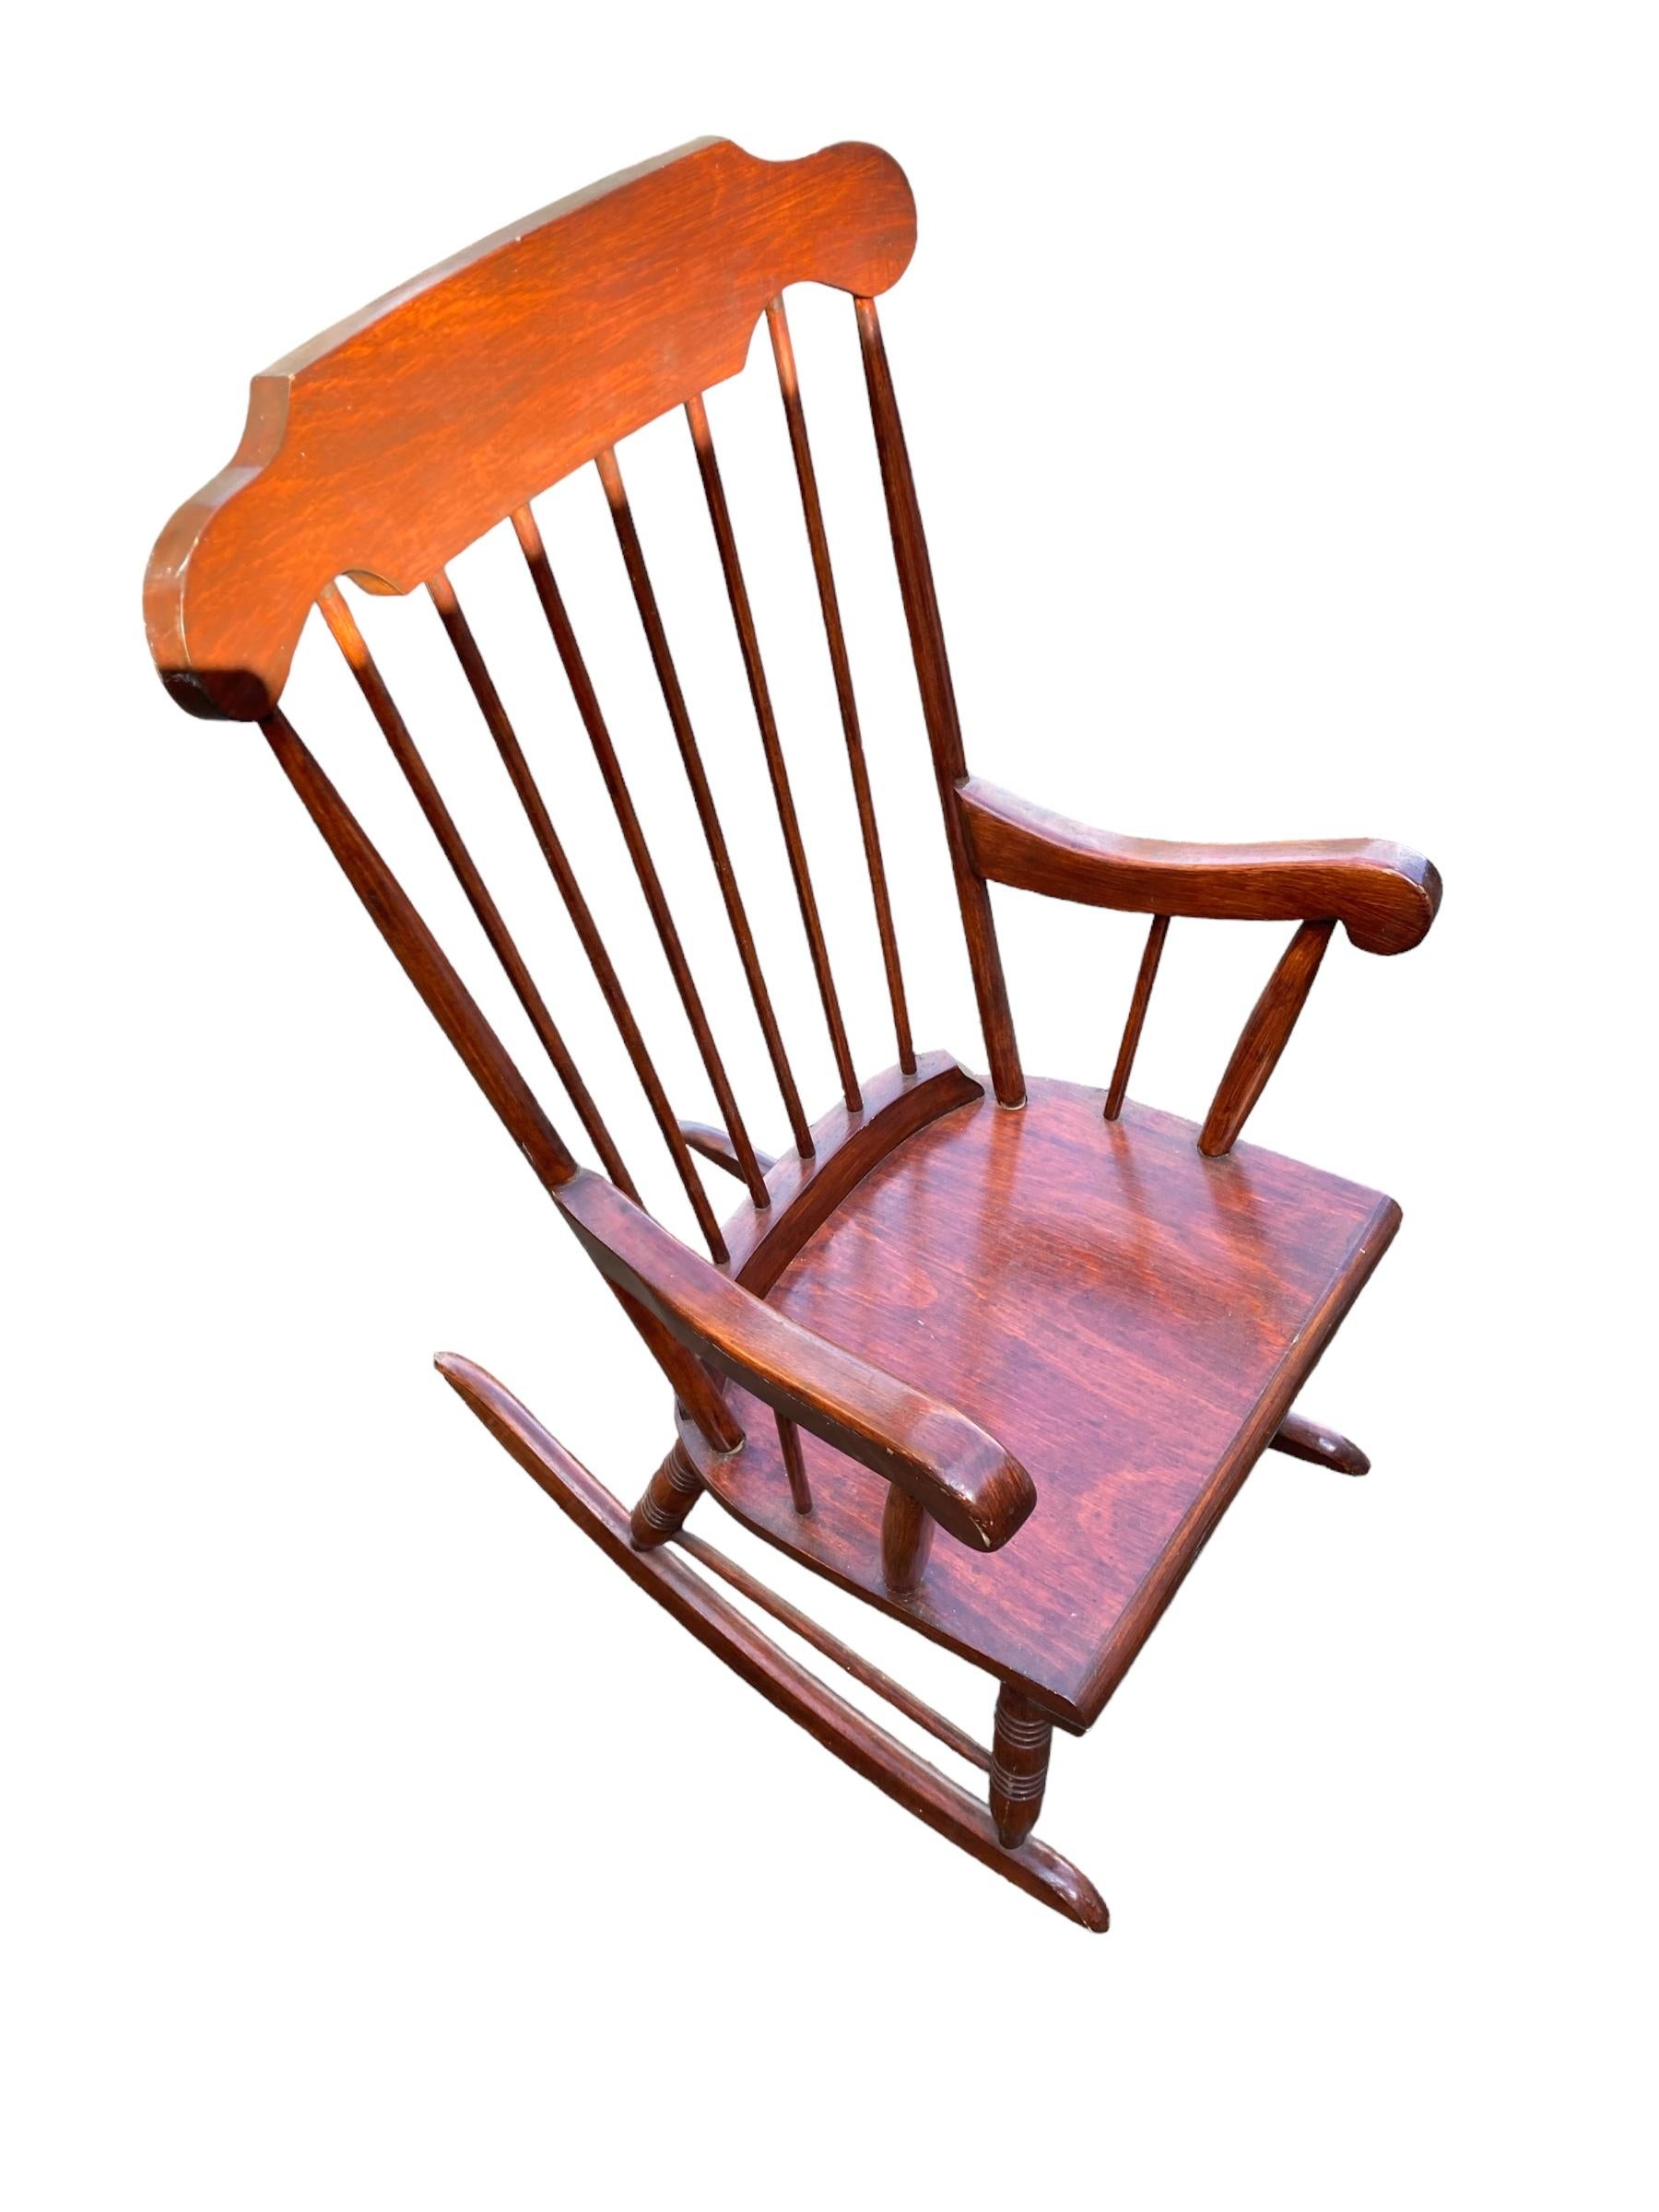 Windsor style rocking chair, Mid 20th Century, Red Mahogany wood For Sale 1